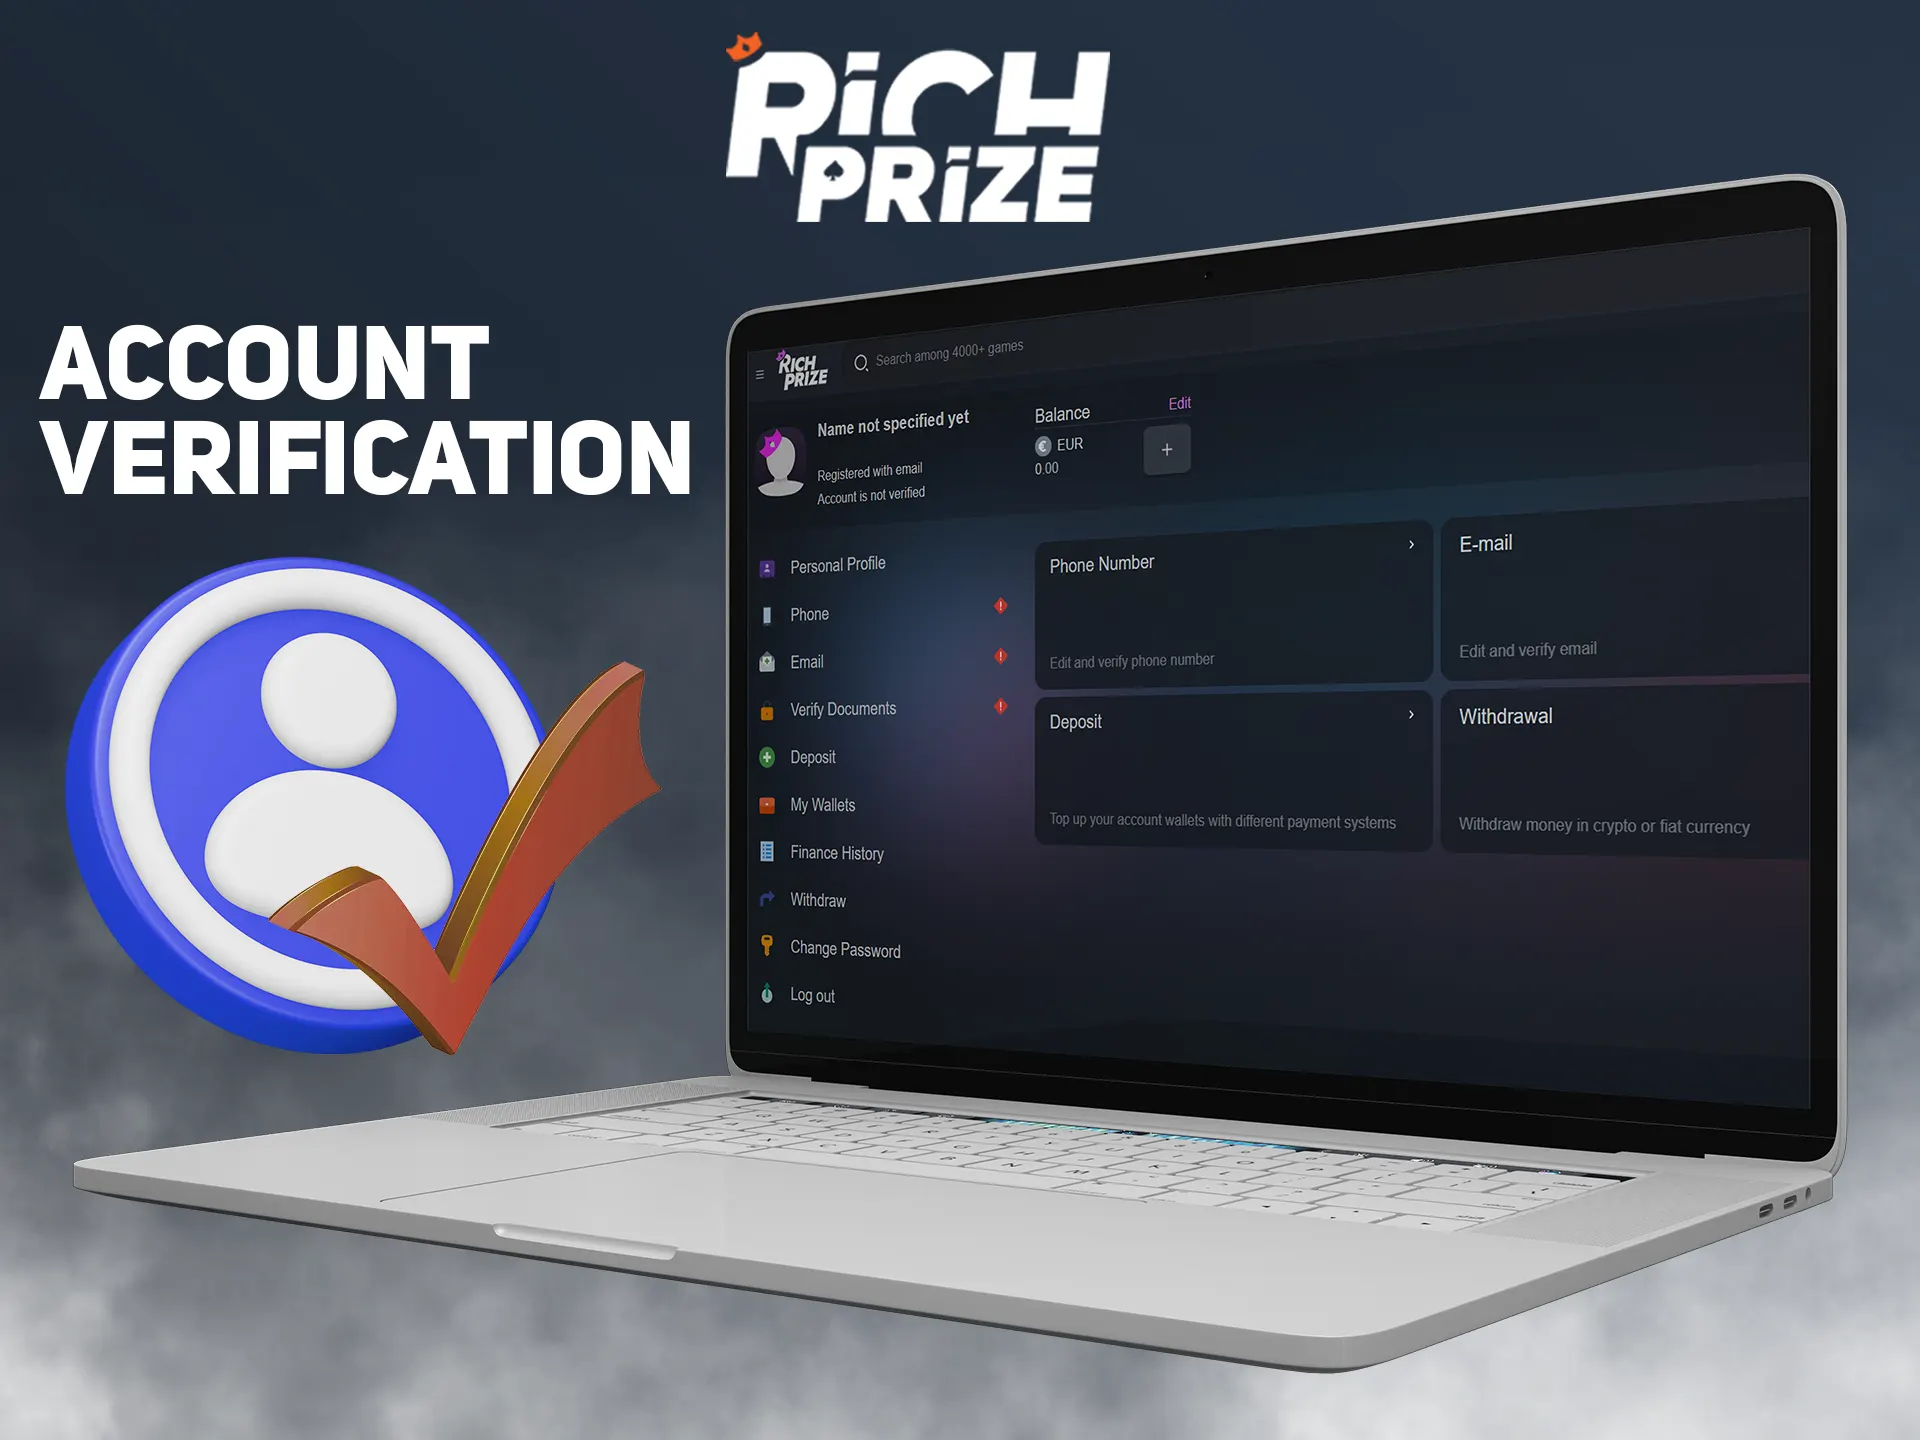 Verify your account for start using the Richprize features.